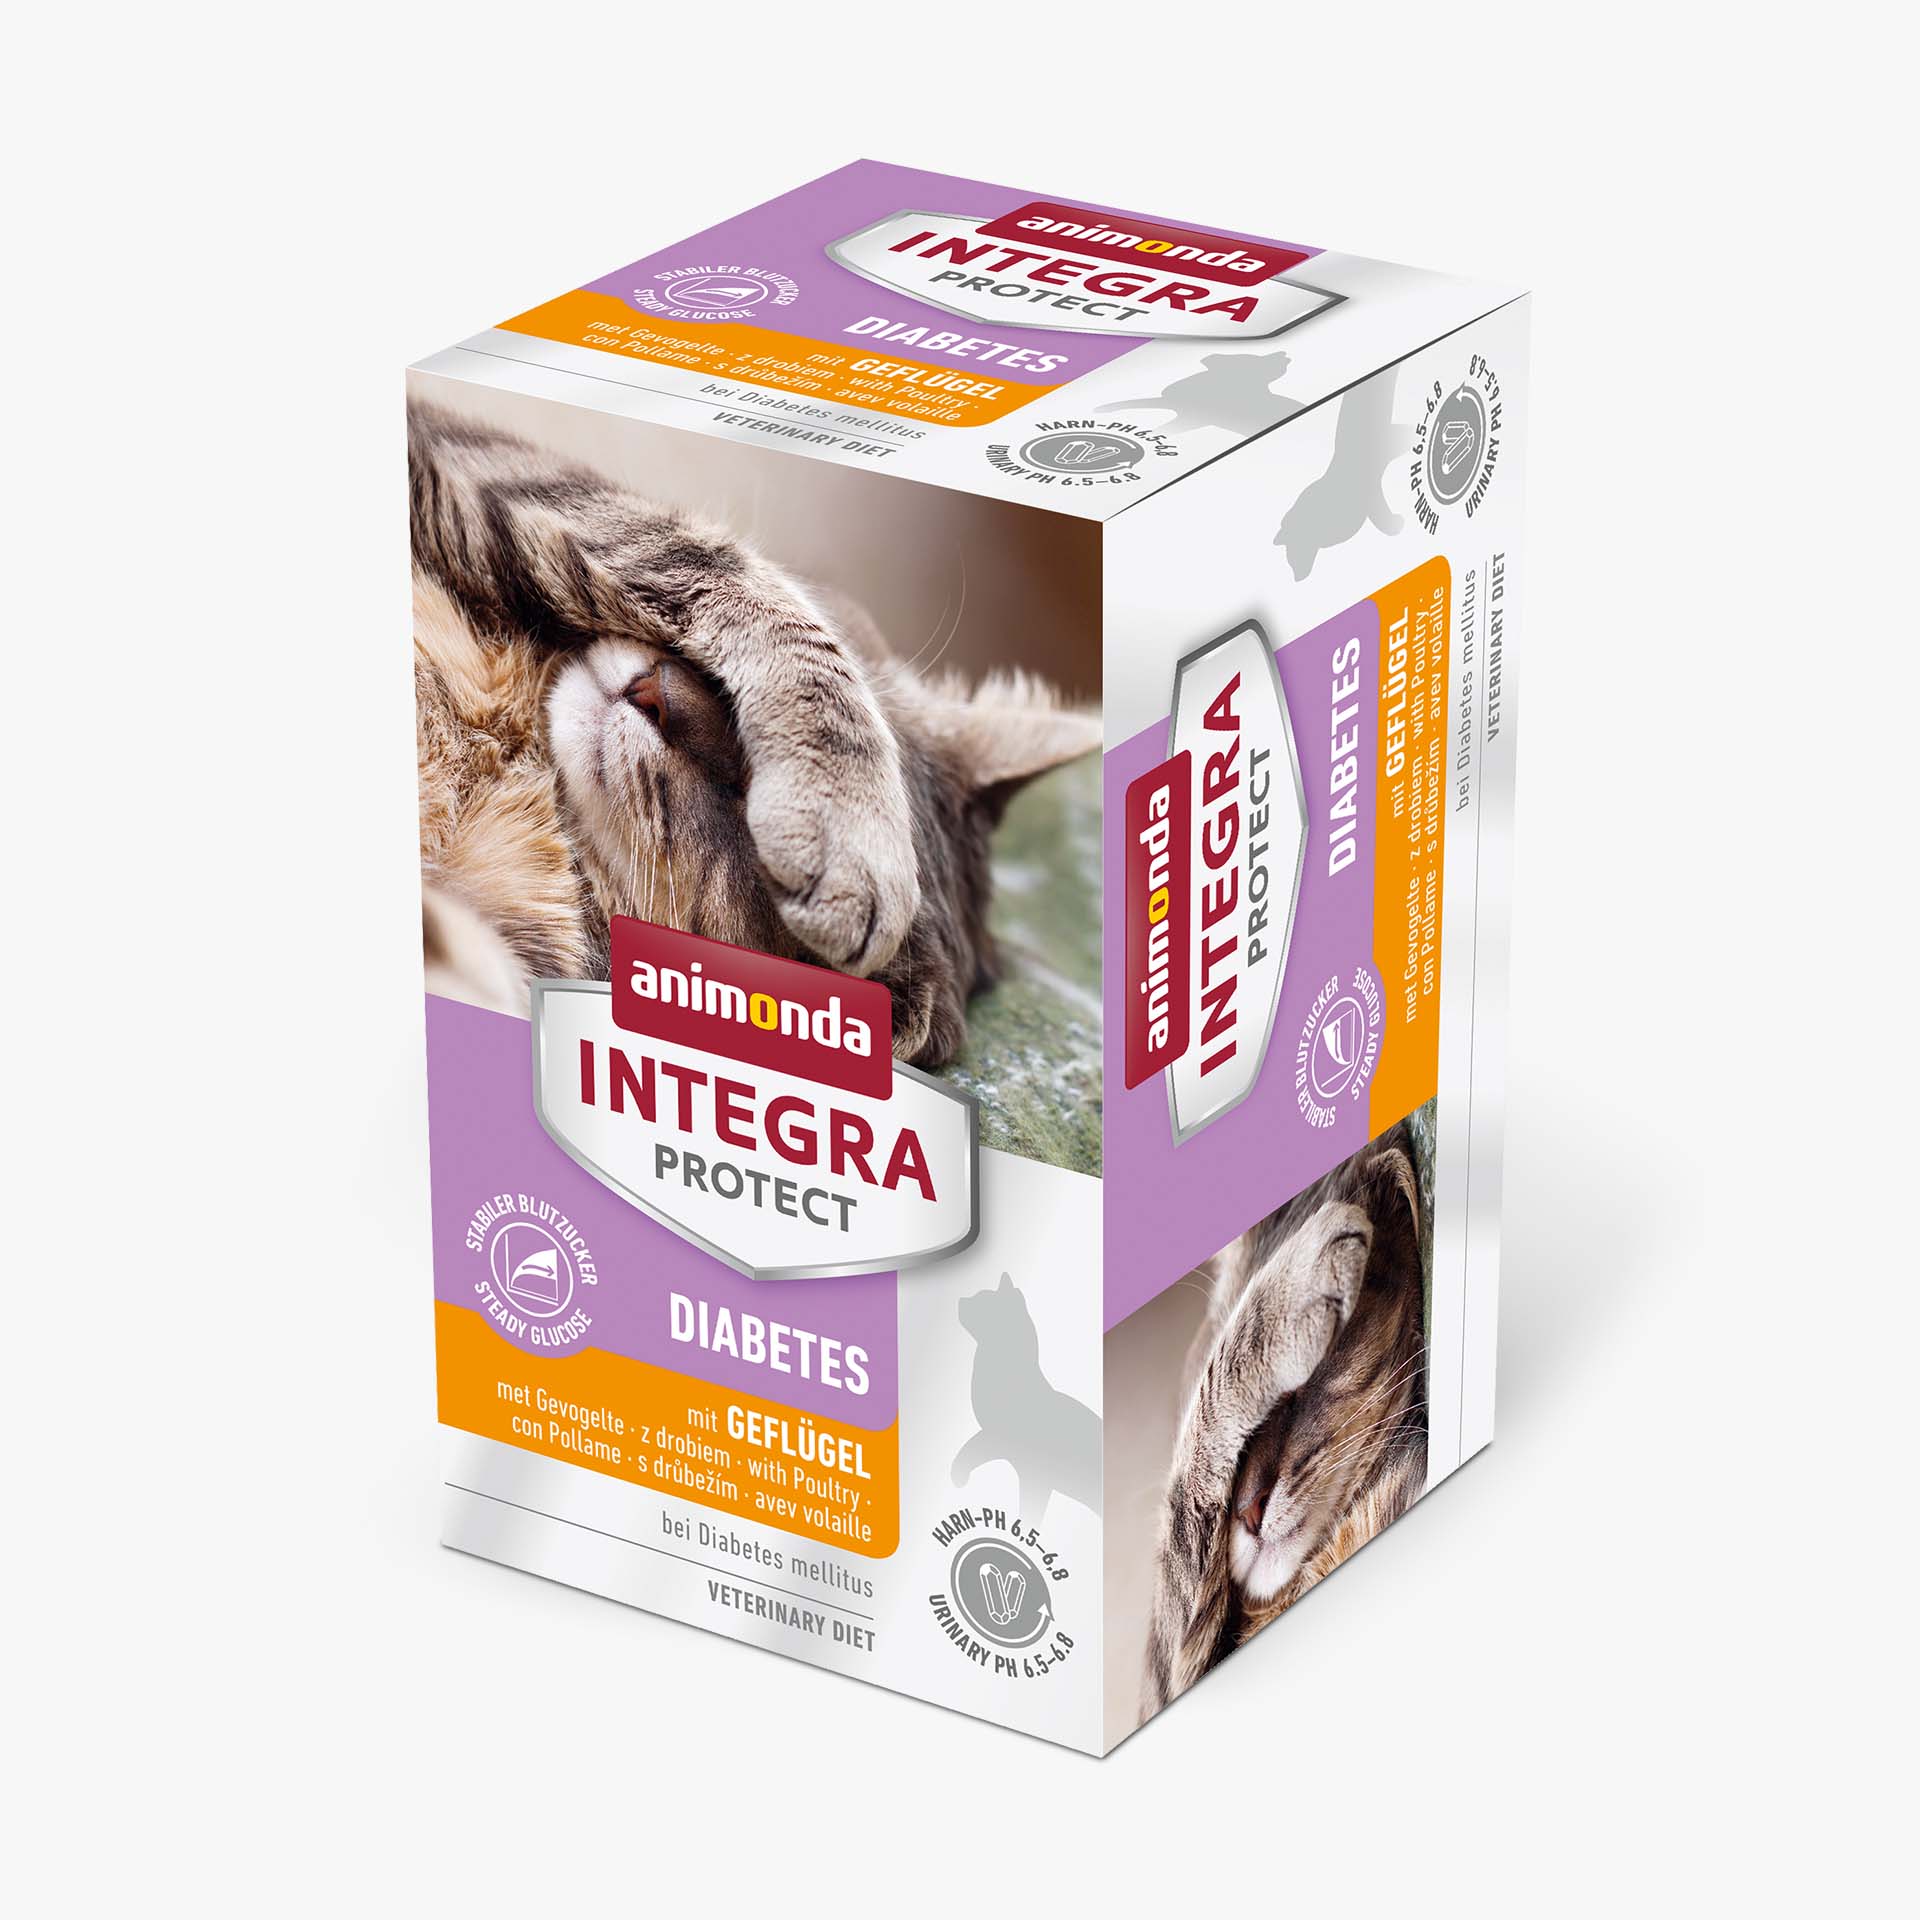 INTEGRA PROTECT with Poultry Diabetes